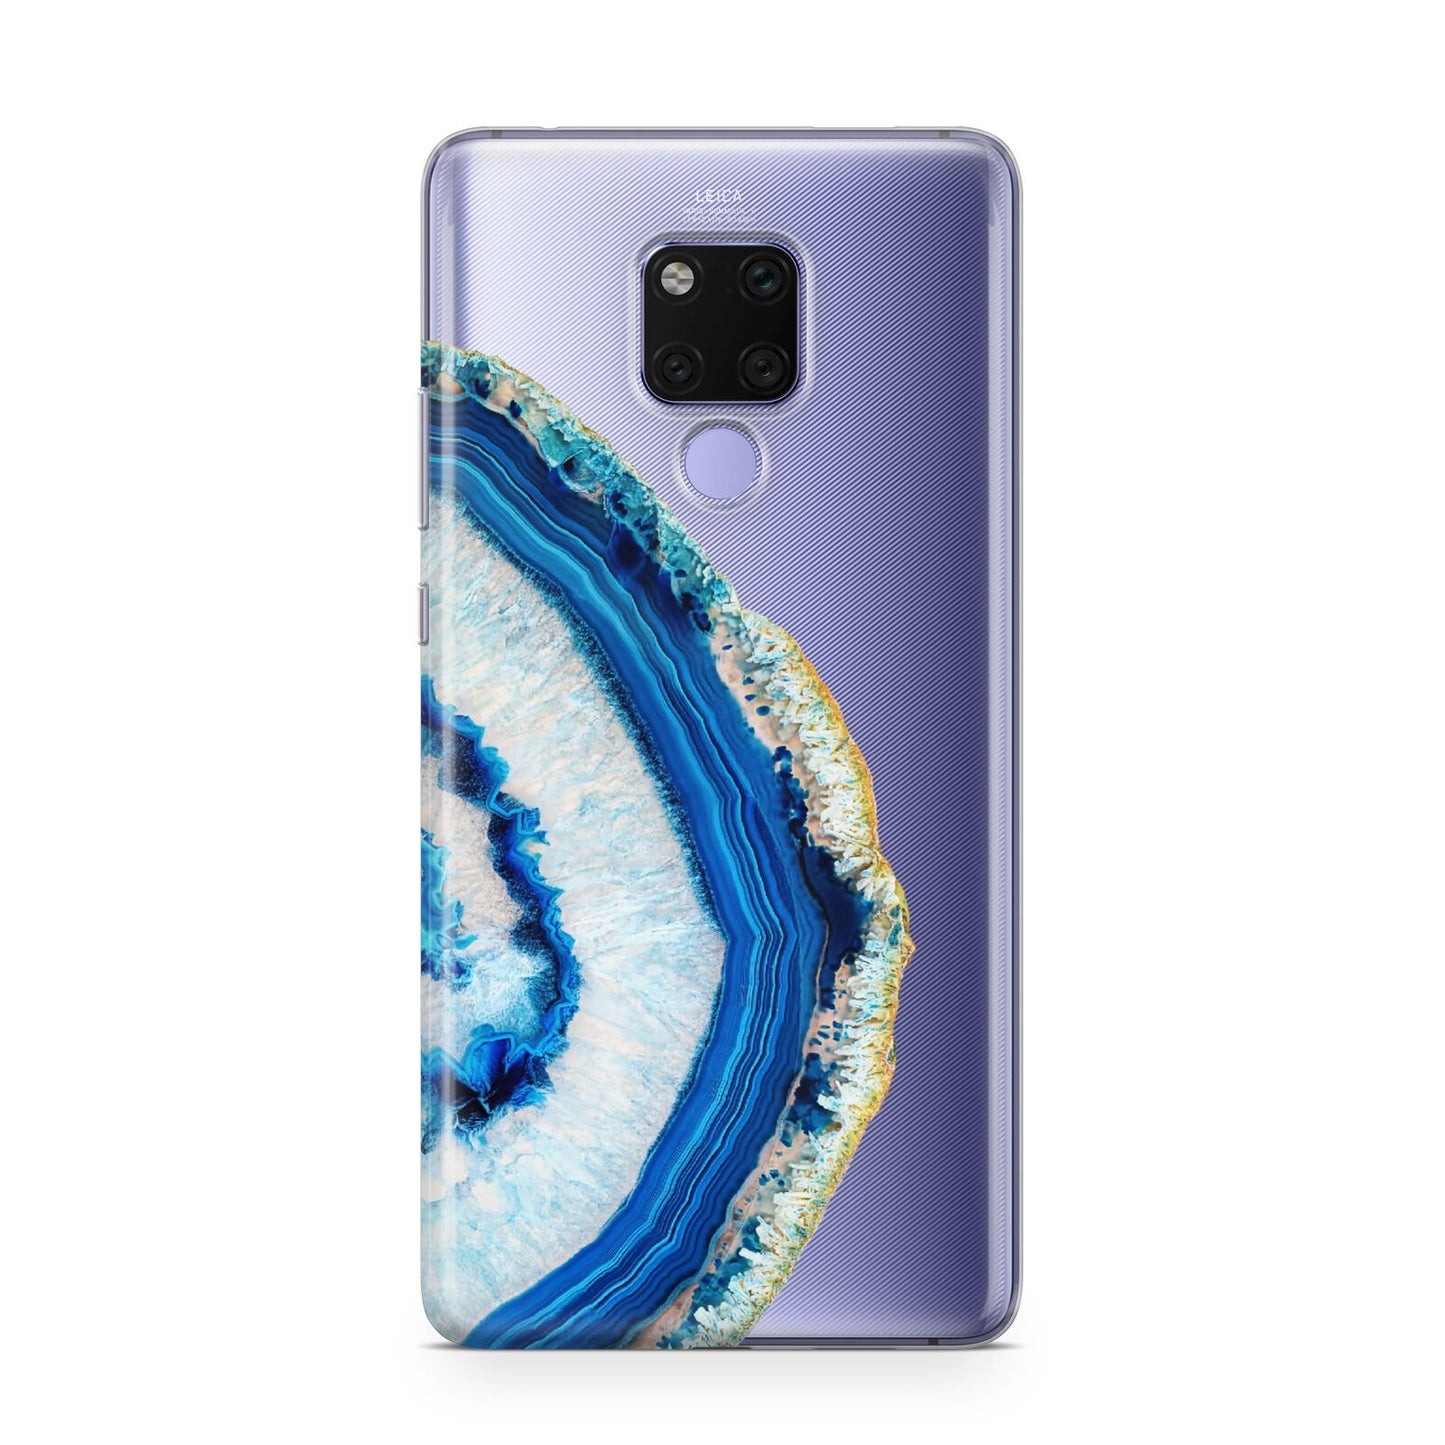 Agate Dark Blue and Turquoise Huawei Mate 20X Phone Case